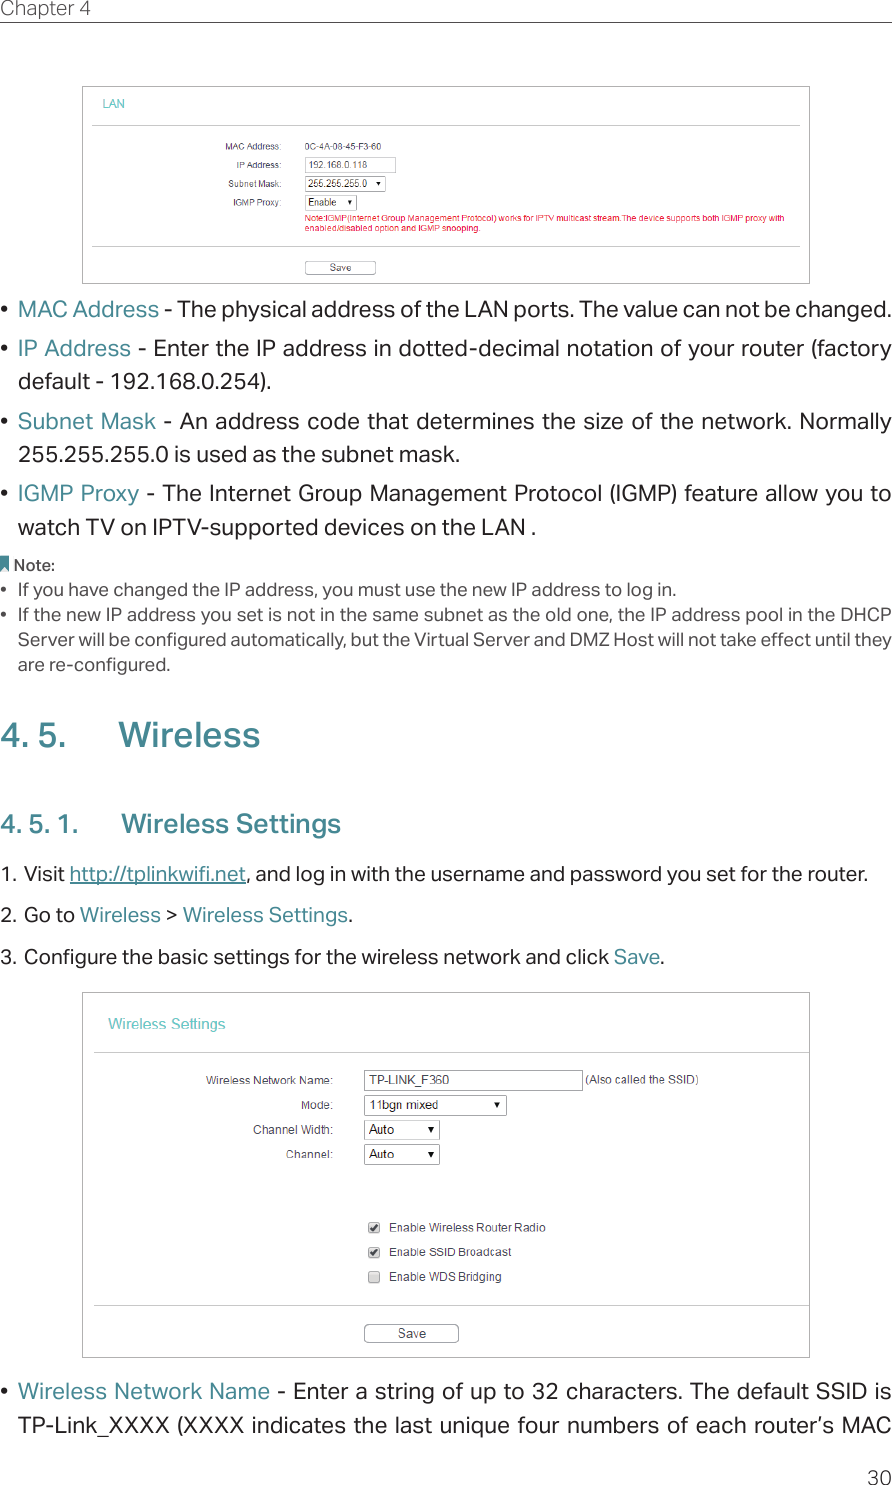 30Chapter 4  •  MAC Address - The physical address of the LAN ports. The value can not be changed.•  IP Address - Enter the IP address in dotted-decimal notation of your router (factory default - 192.168.0.254).•  Subnet Mask - An address code that determines the size of the network. Normally 255.255.255.0 is used as the subnet mask.•  IGMP Proxy - The Internet Group Management Protocol (IGMP) feature allow you to watch TV on IPTV-supported devices on the LAN .Note:•  If you have changed the IP address, you must use the new IP address to log in.•  If the new IP address you set is not in the same subnet as the old one, the IP address pool in the DHCP Server will be configured automatically, but the Virtual Server and DMZ Host will not take effect until they are re-configured.4. 5.  Wireless4. 5. 1.  Wireless Settings1. Visit http://tplinkwifi.net, and log in with the username and password you set for the router.2. Go to Wireless &gt; Wireless Settings. 3. Configure the basic settings for the wireless network and click Save.•  Wireless Network Name - Enter a string of up to 32 characters. The default SSID is TP-Link_XXXX (XXXX indicates the last unique four numbers of each router’s MAC 